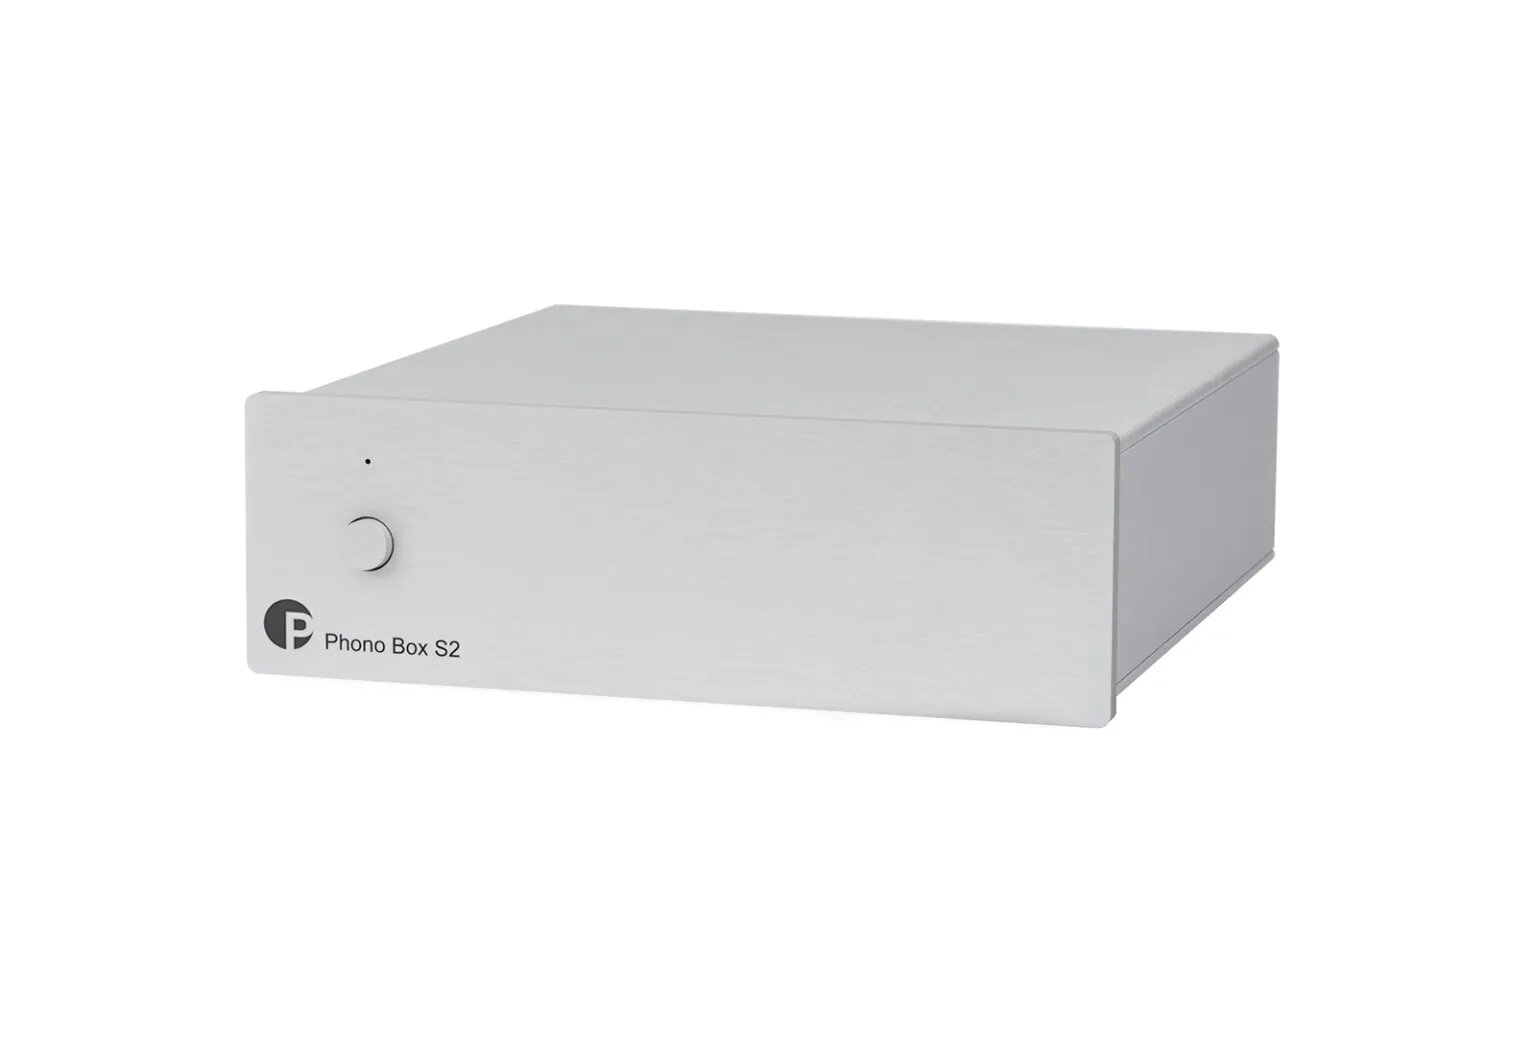 PRO-JECT- PHONO BOX S2 - Pro-ject Audio at Vinyl Sound. Available at the best price: Pro-ject Turntables X1 - X8 - X2 – Pro-ject 6 PerspeX SB - RPM 1 Carbon - RPM 10 Carbon – Xtension 12 Evolution... Pro-ject HiFi Electronics Phono Preamplifier · Vinyl Recording · Pro-ject Preamplifier – Pro-ject Phono Box...